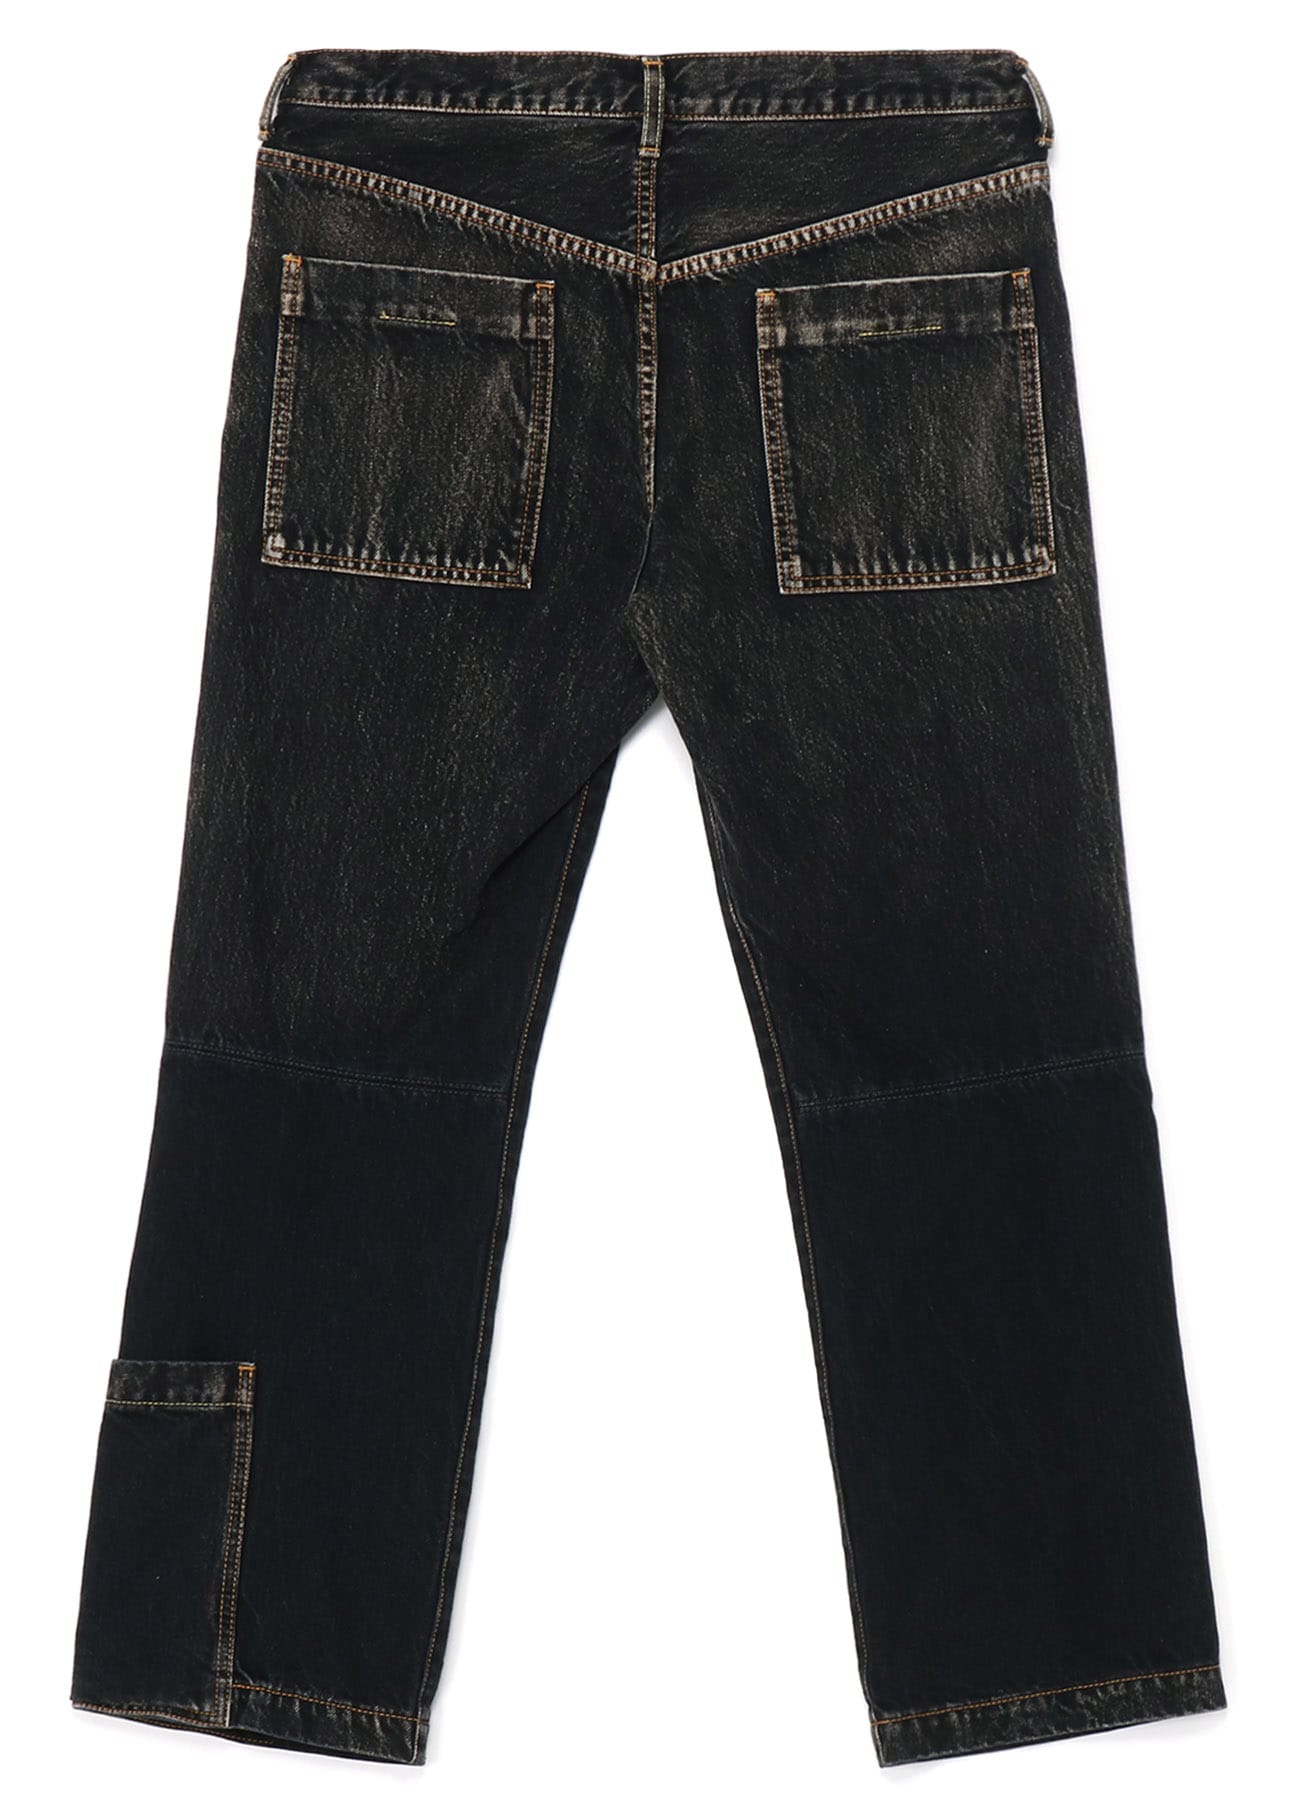 SP.BK DENIM MW I-LEFT HEM OUT PKT G-A(S Black): Vintage 1.2｜THE 